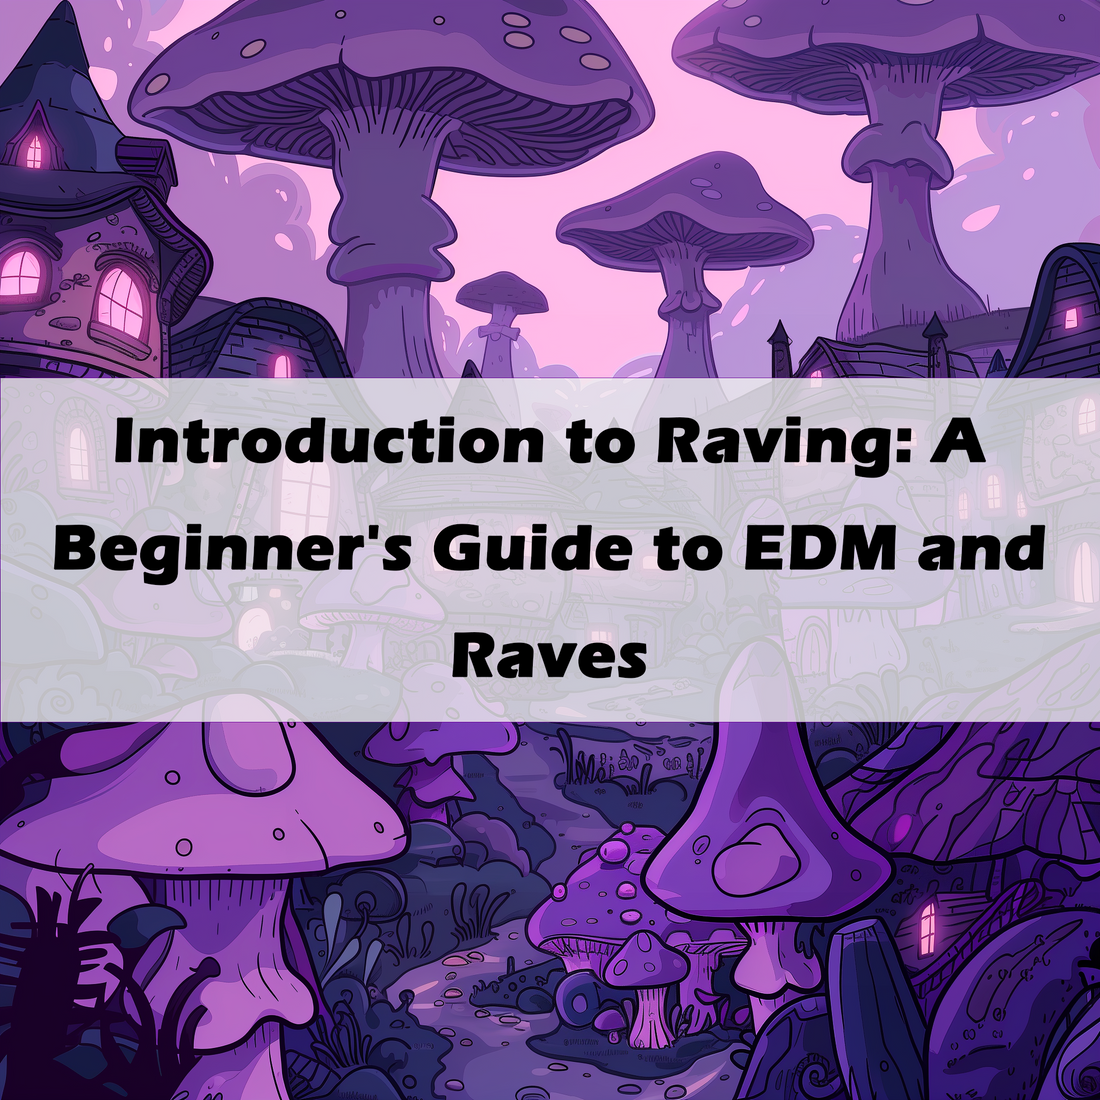 Introduction to Raving: A Beginner's Guide to EDM and Raves